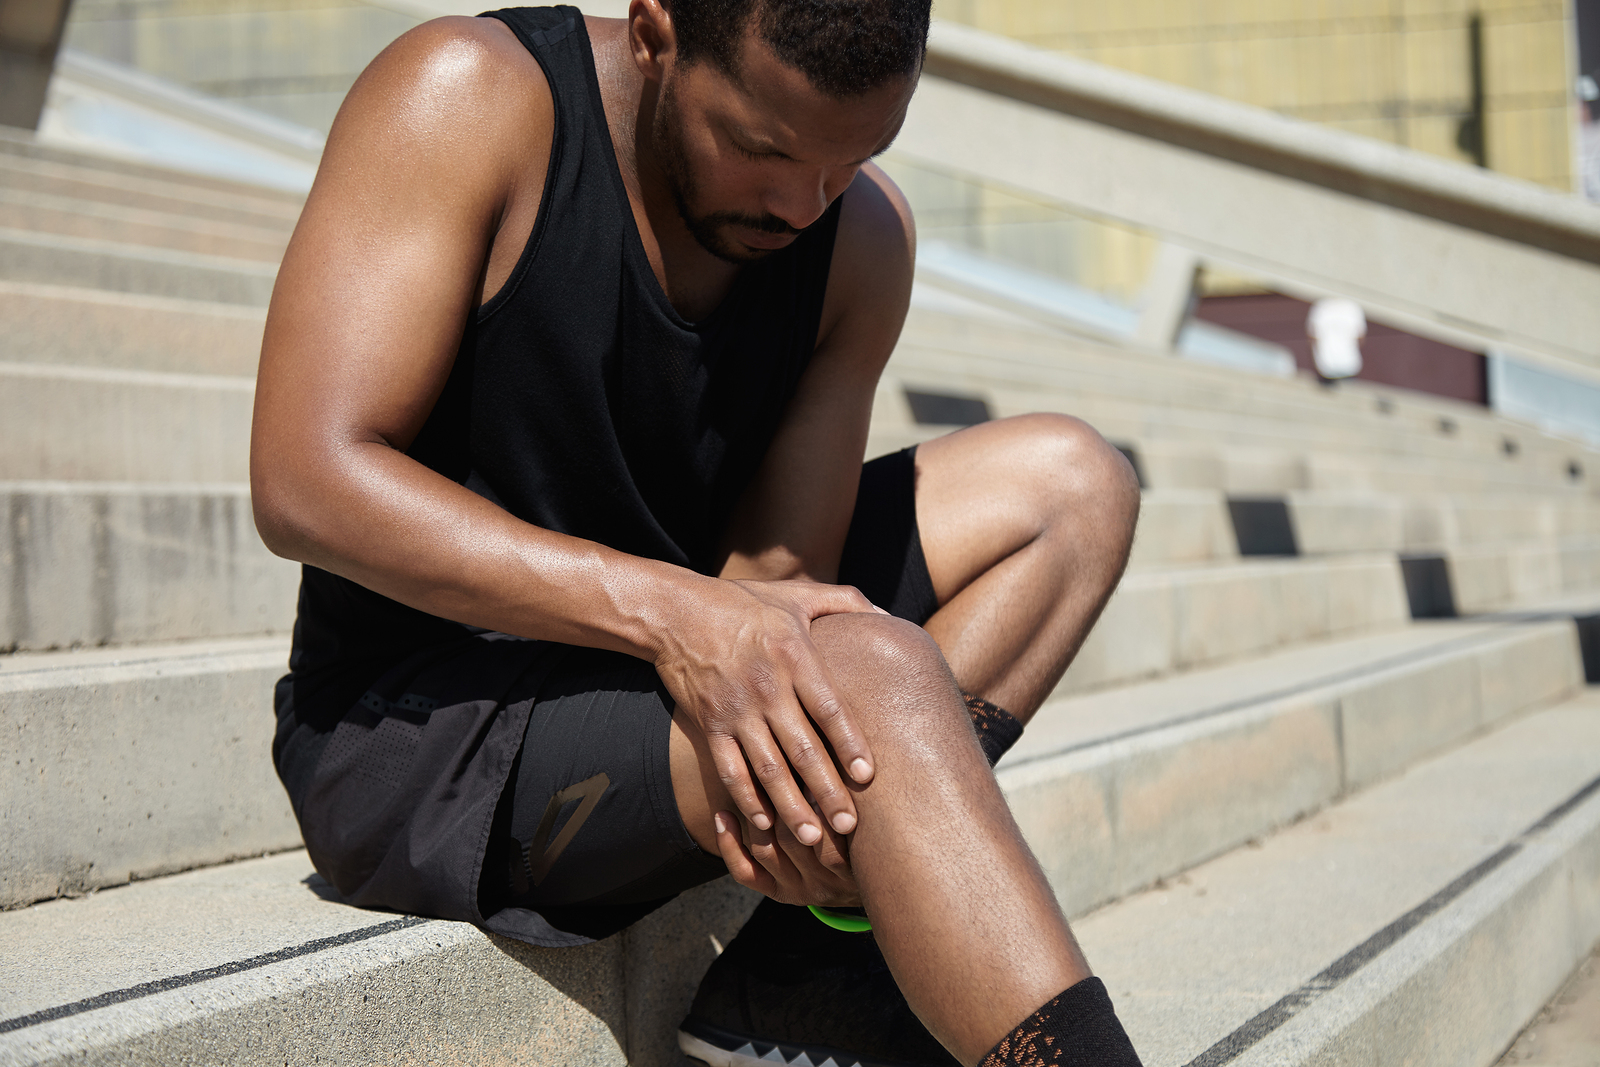 Handsome muscular male jogger wearing black training outfit touching his knee in pain with clasped hands having sprain or rupture in his muscles after exercising outdoors. Sports injury concept